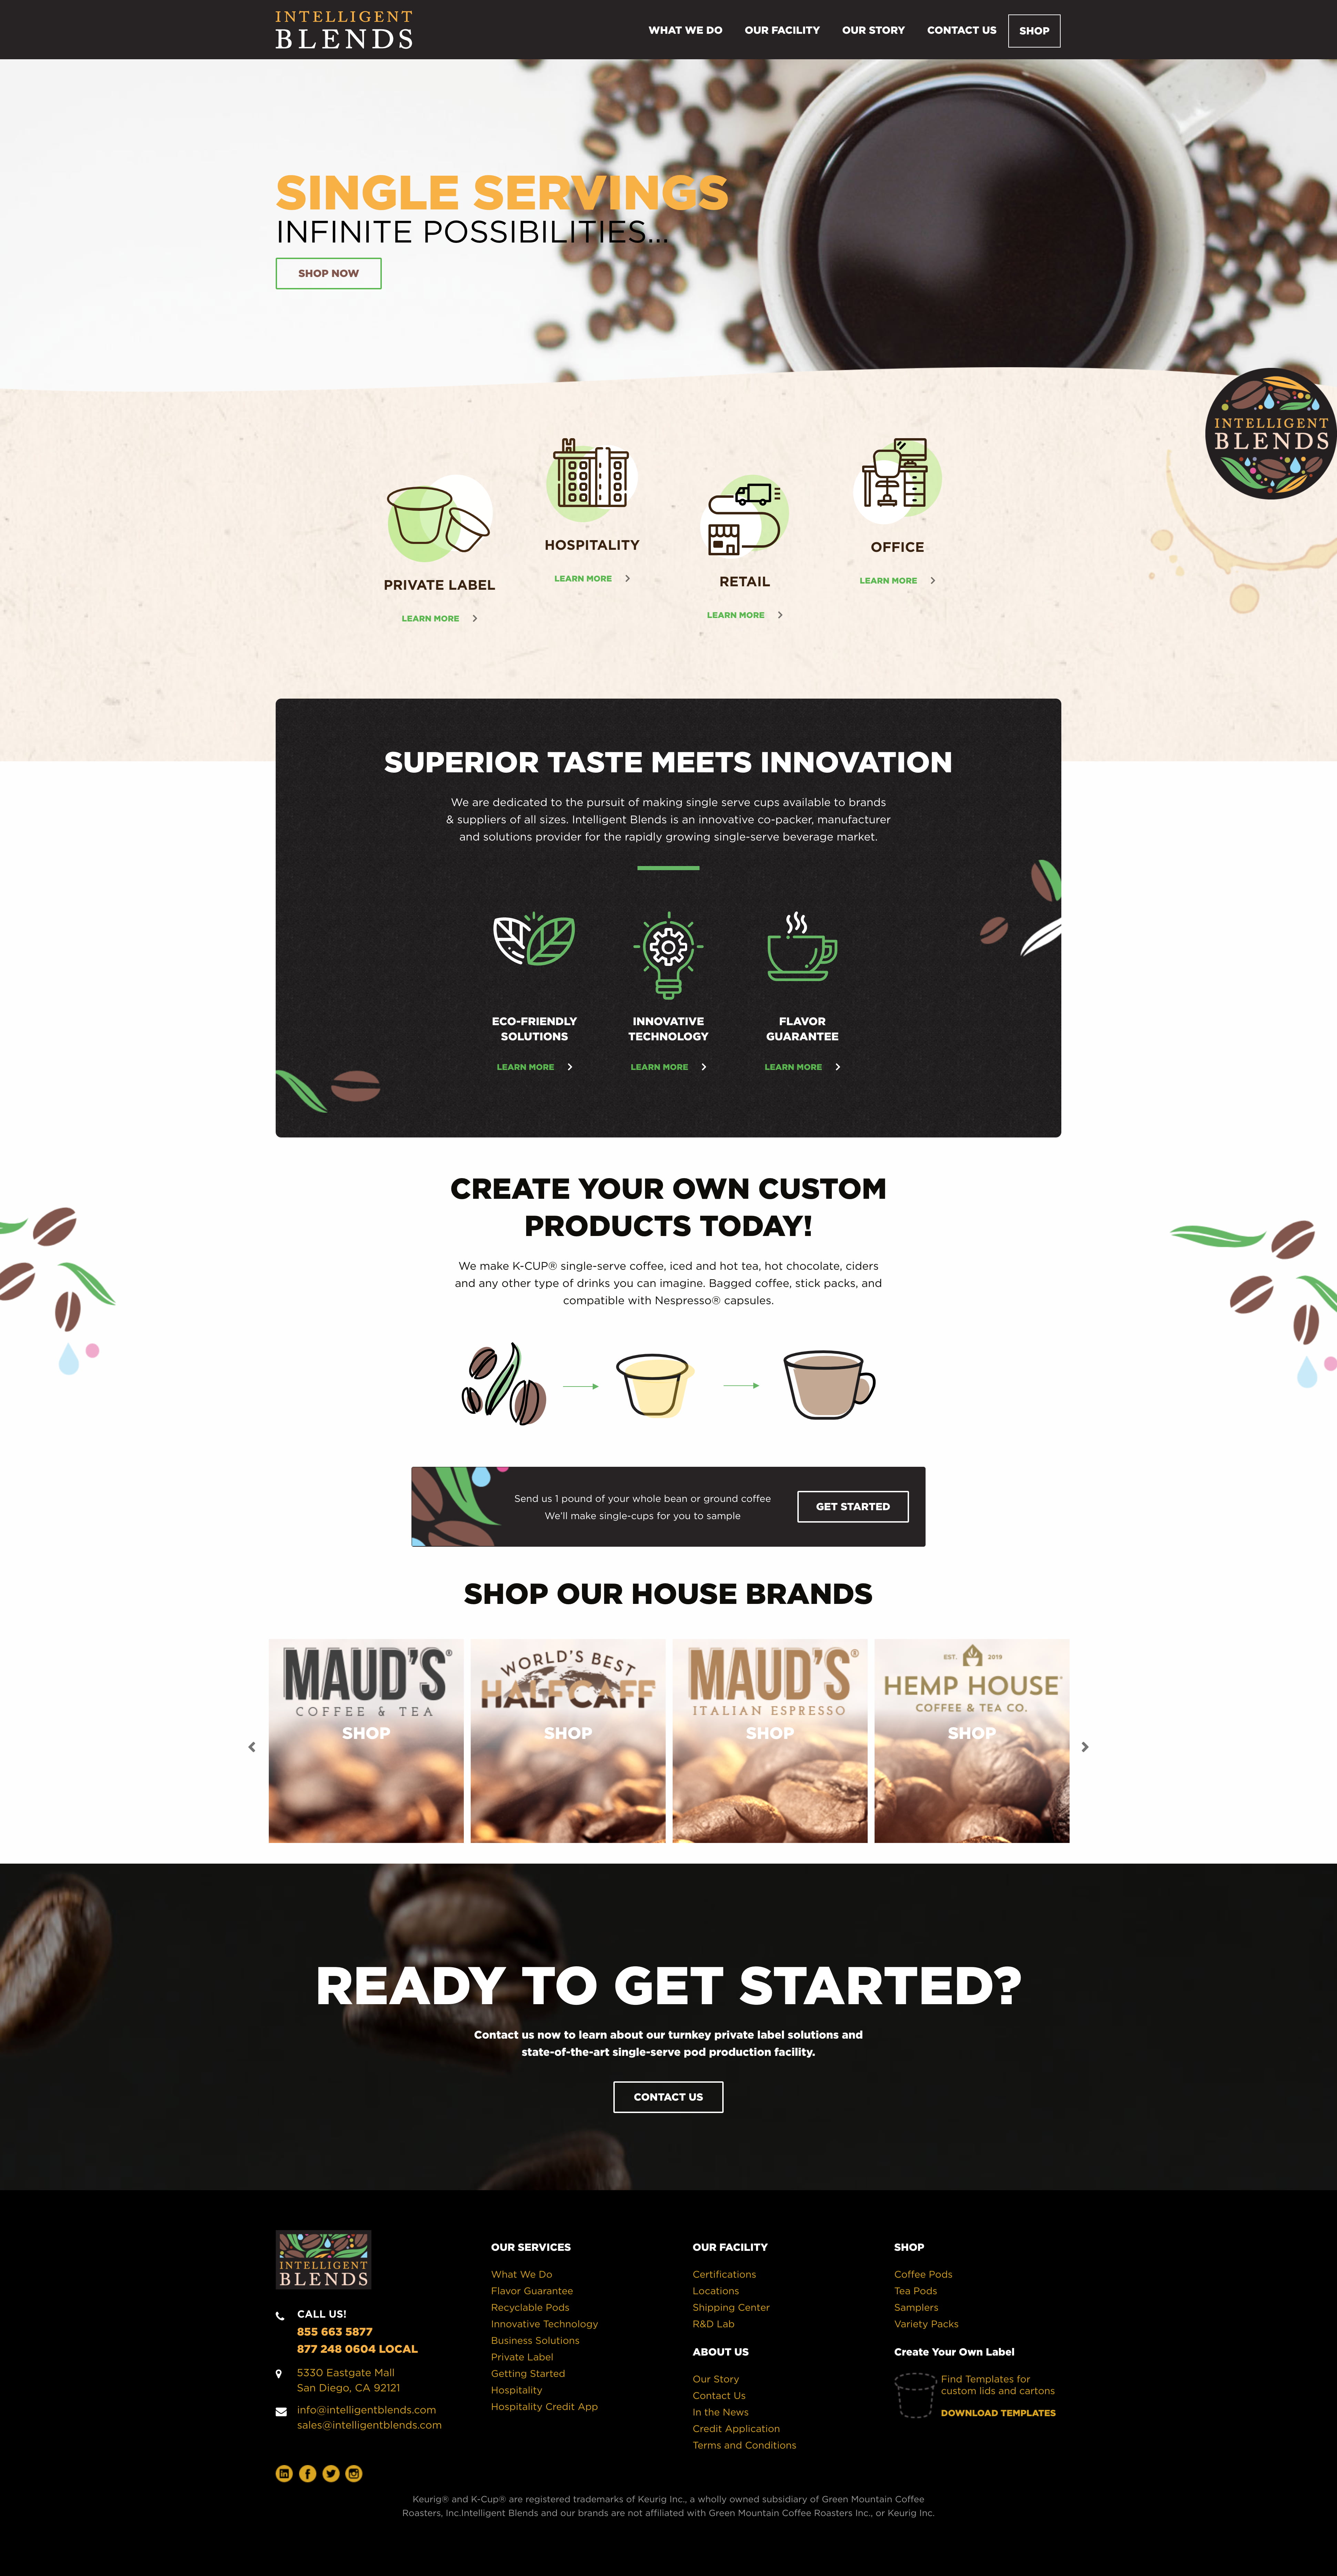 promotion of gourmet coffee through the website